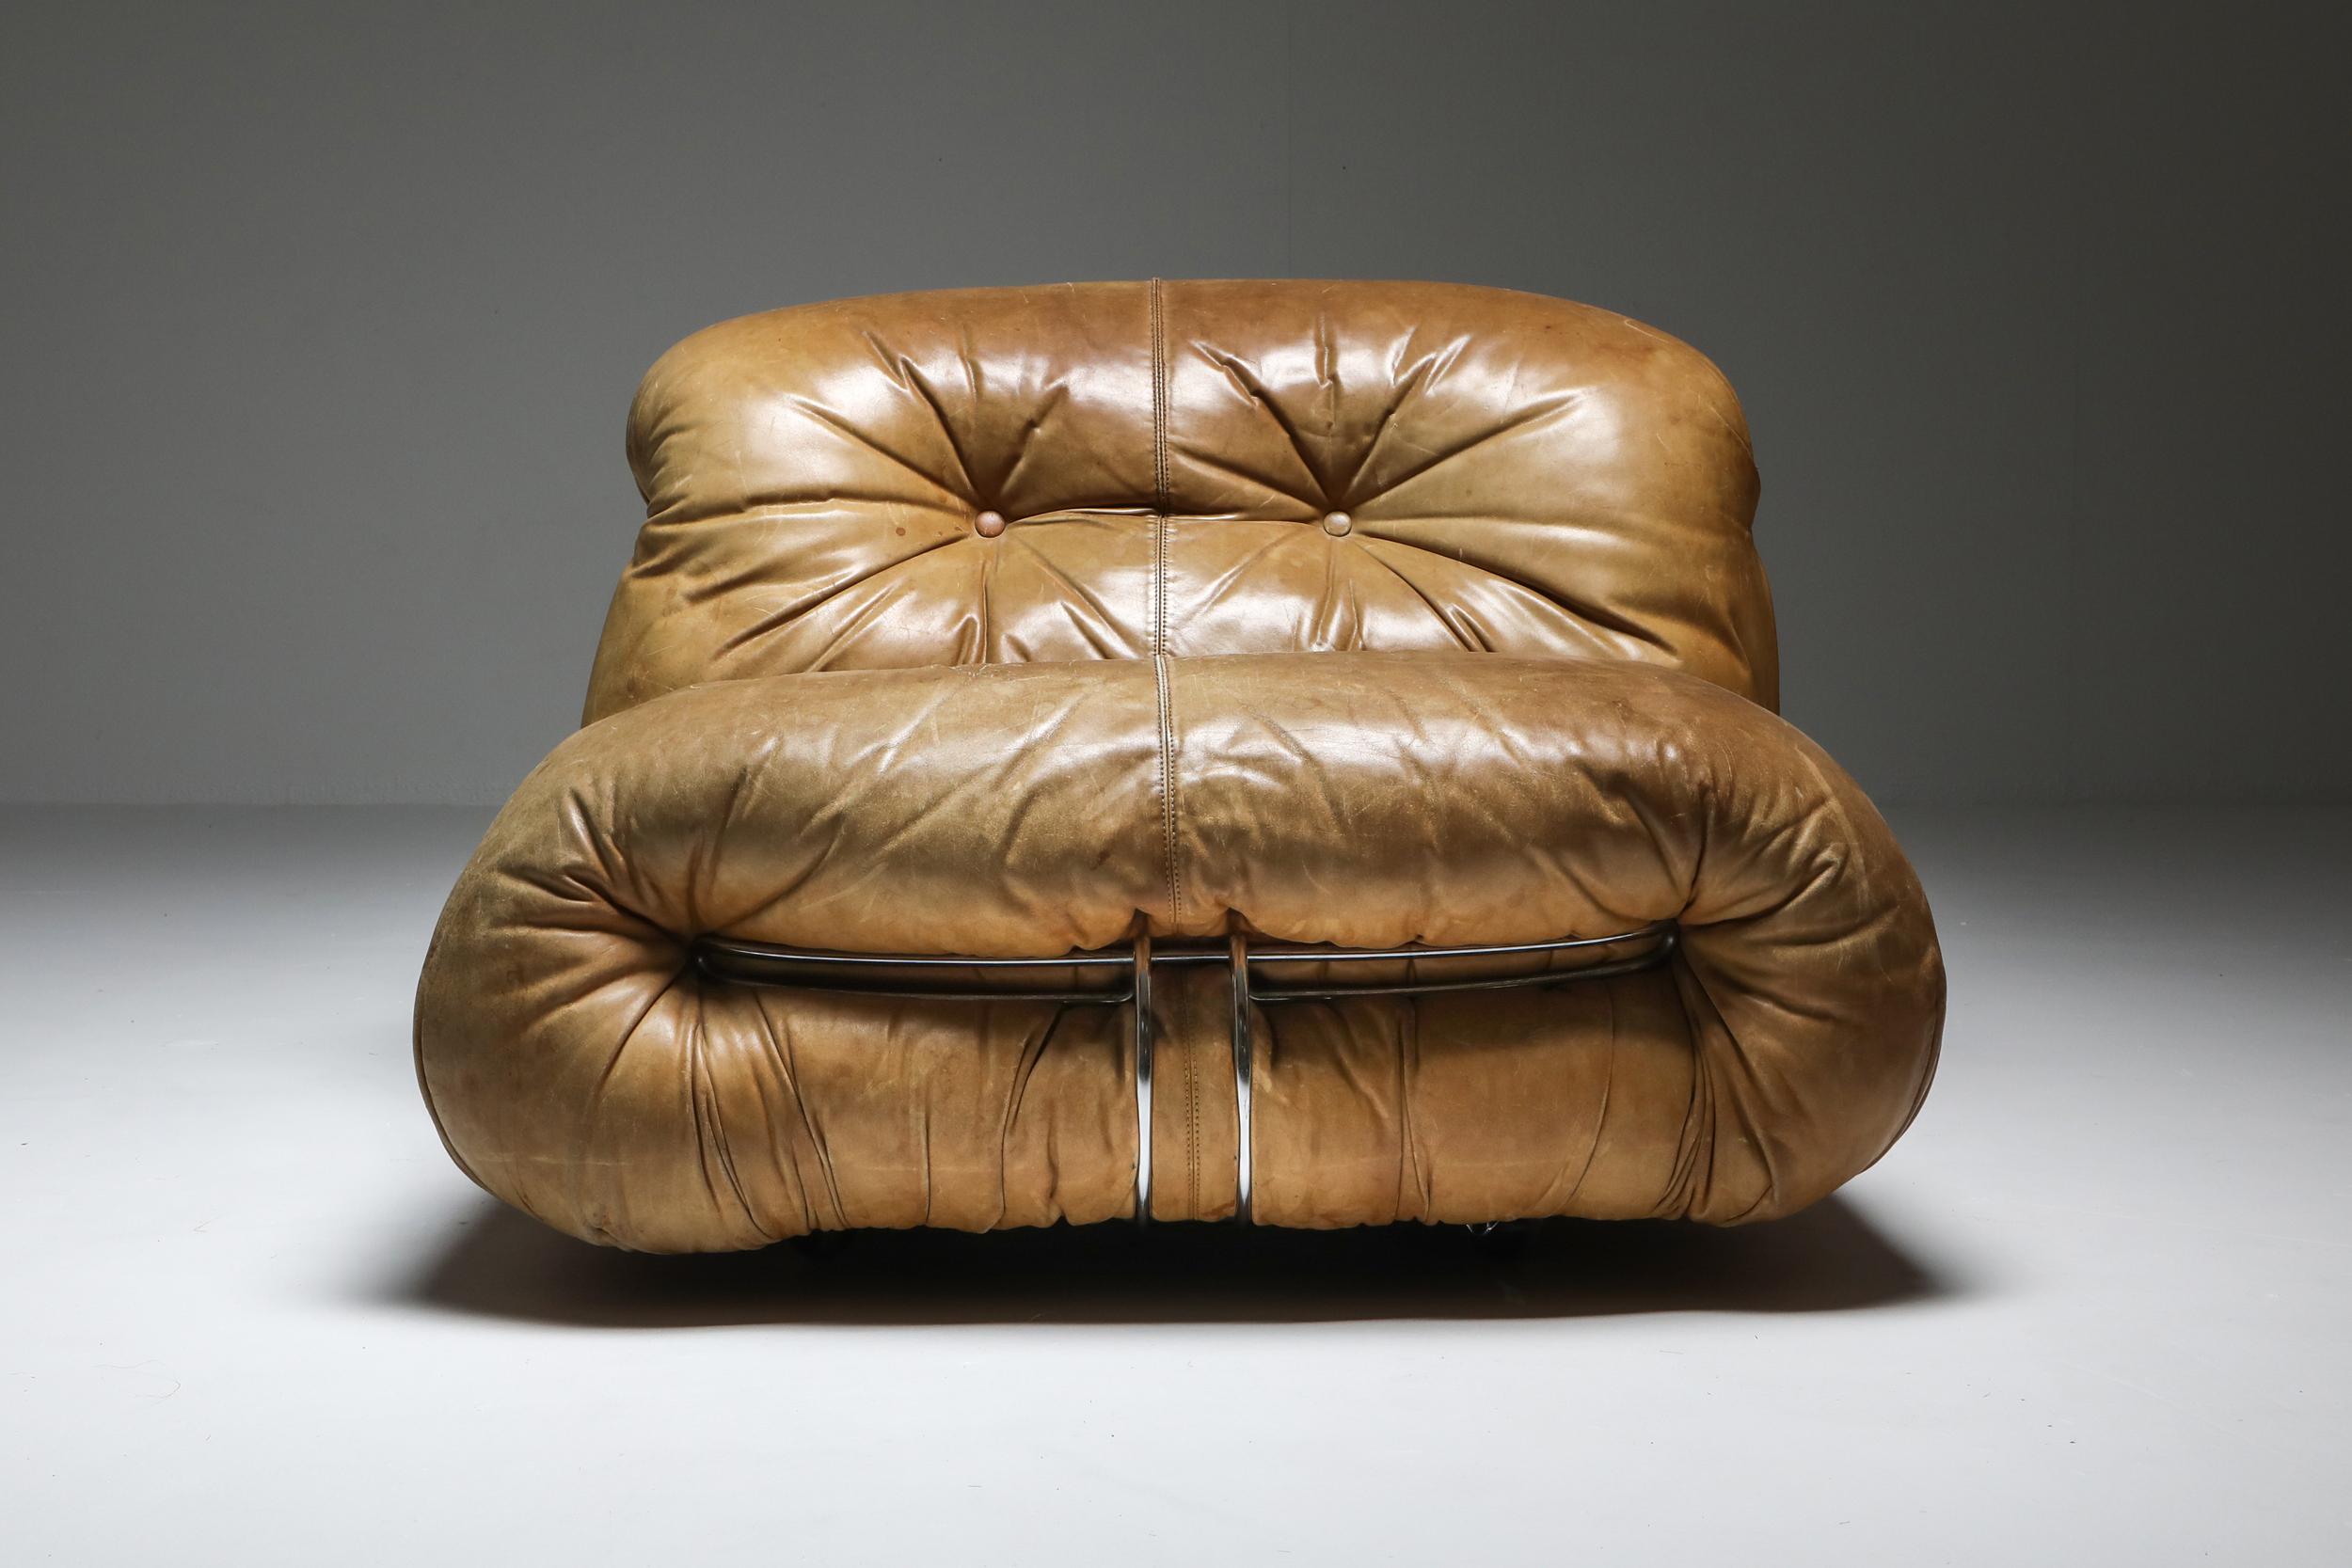 Afra & Tobia Scarpa 'Soriana' club chair in brown leather and metal, made in Italy, 1969. 

Postmodern piece by Italian designer couple Afra & Tobia Scarpa. Tufted leather seating, showing beautiful patina and a chromed steel frame. Tobia & Afra